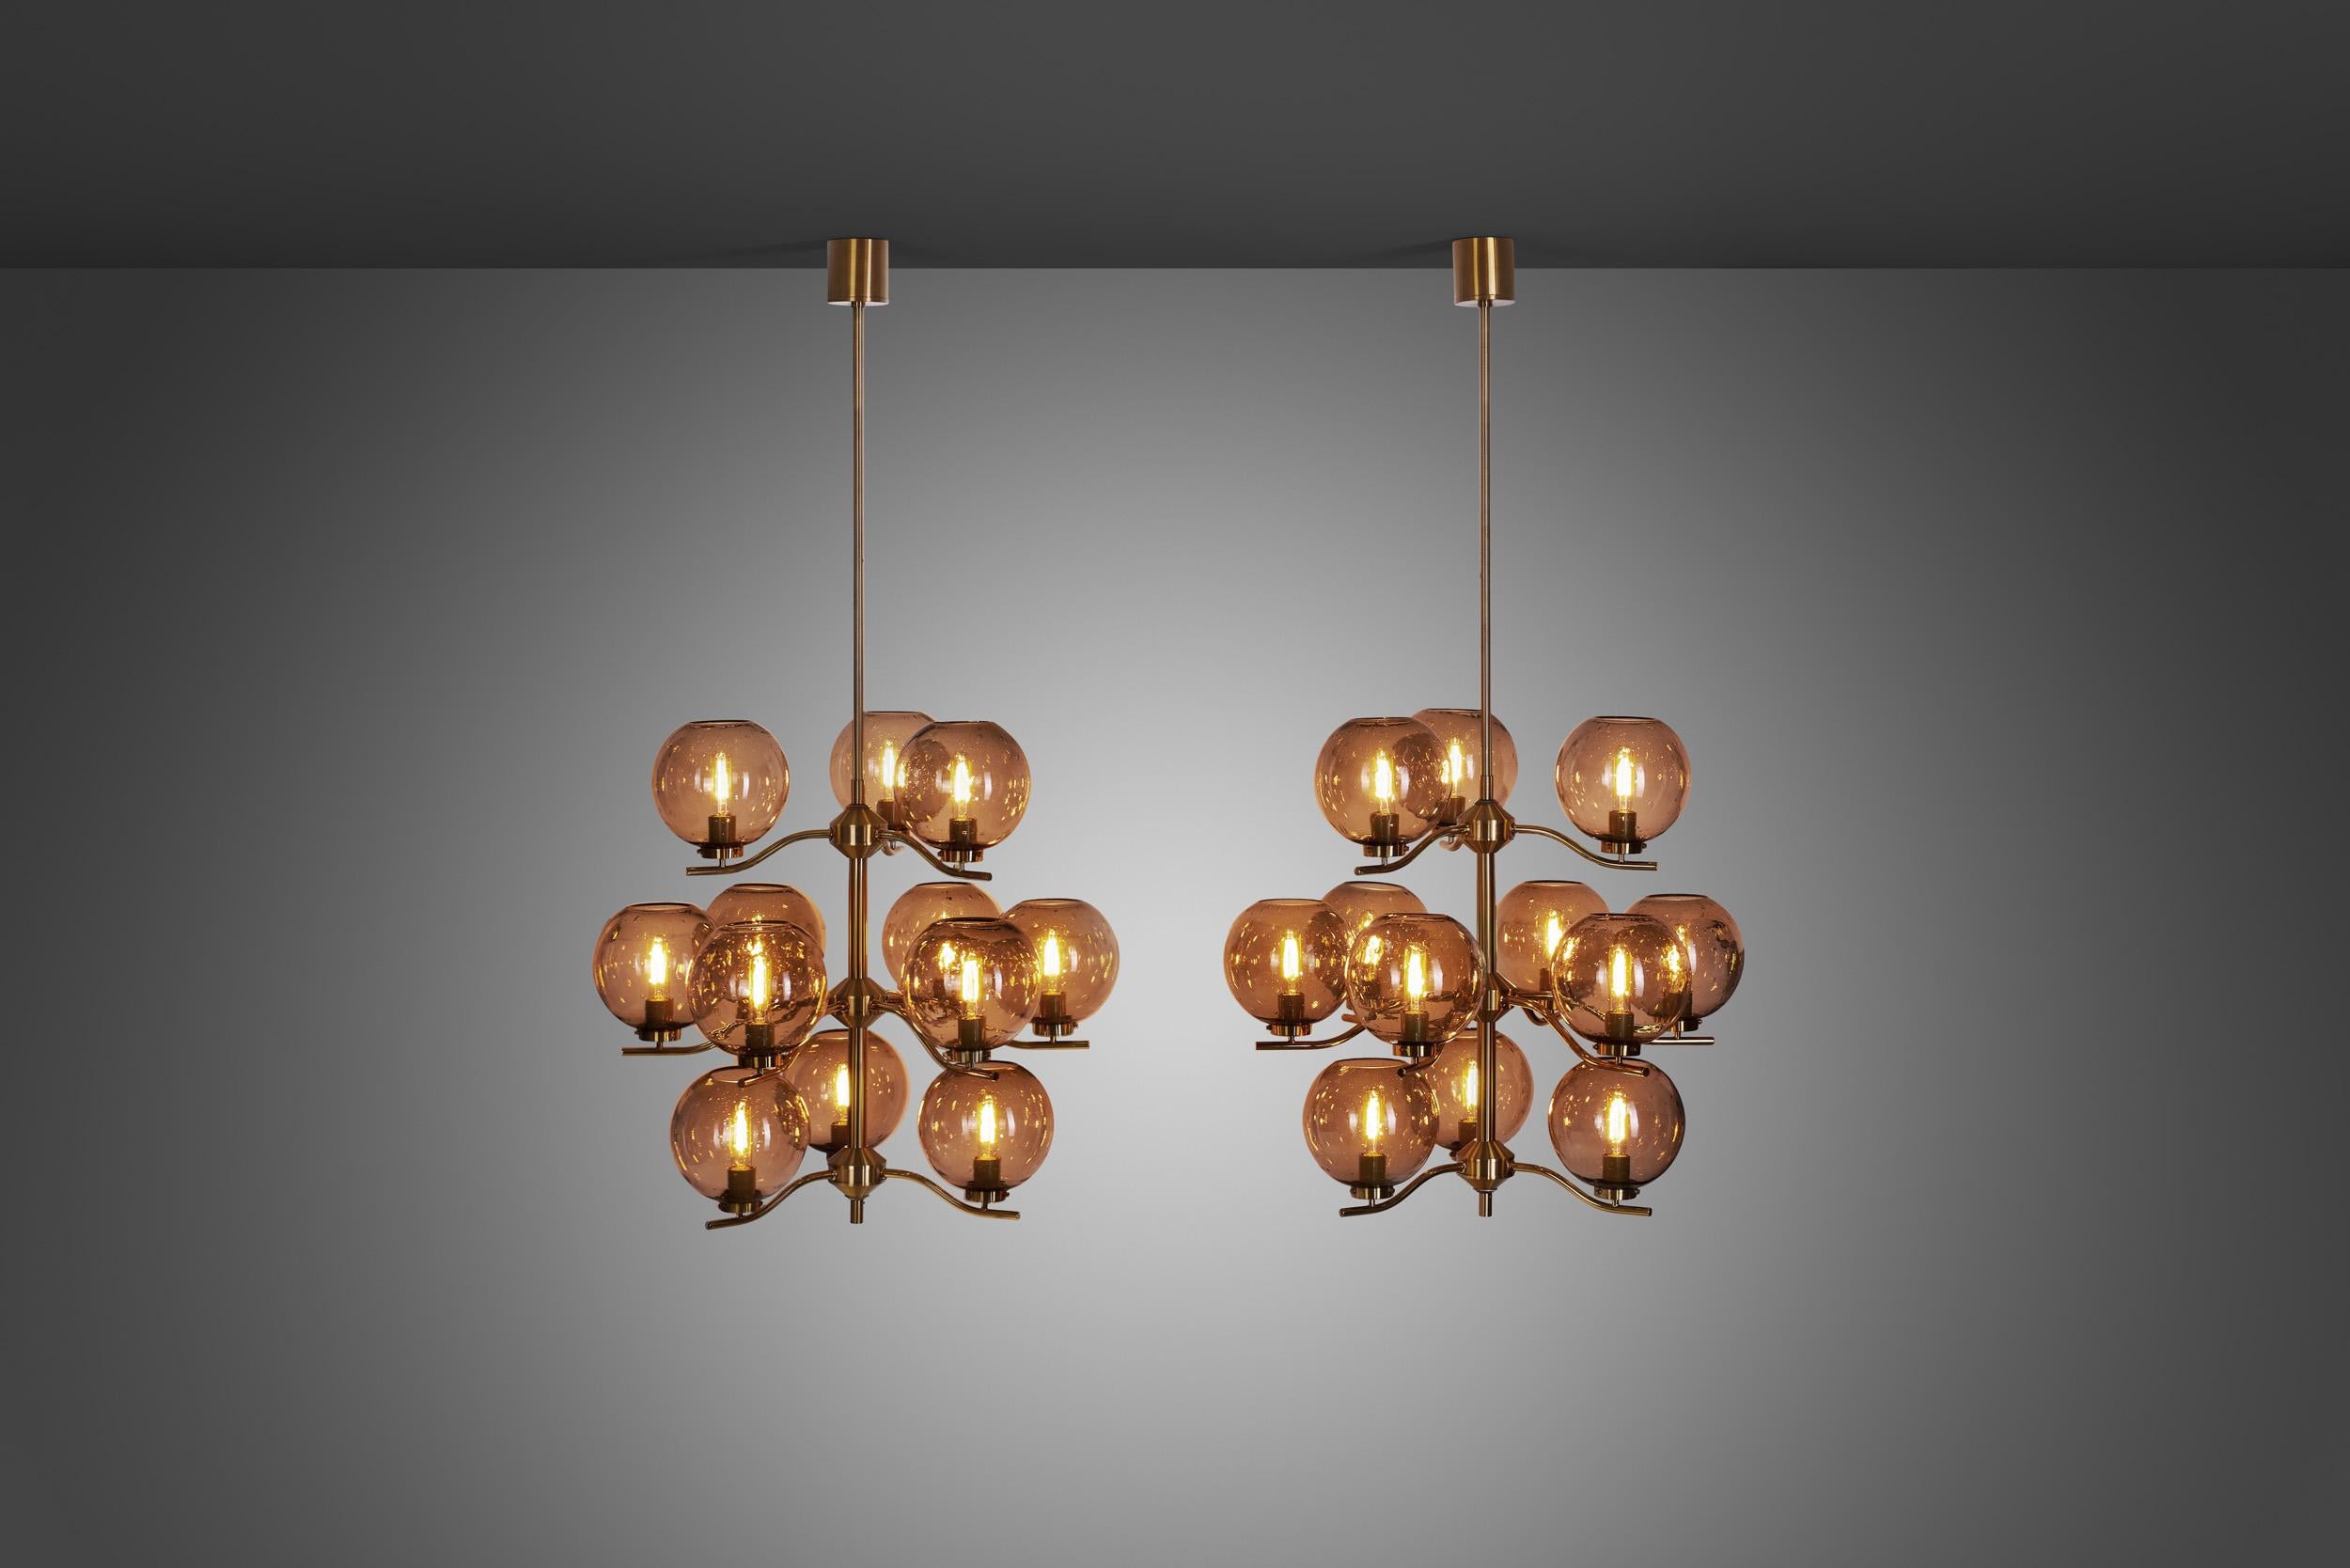 This marvellous pair of chandeliers is a rarity from Swedish designer, Holger Johansson, who created them for his own company, Westal. With a brass frame holding 12 translucent bubble glass shades, grandiose and stylish are the words to describe